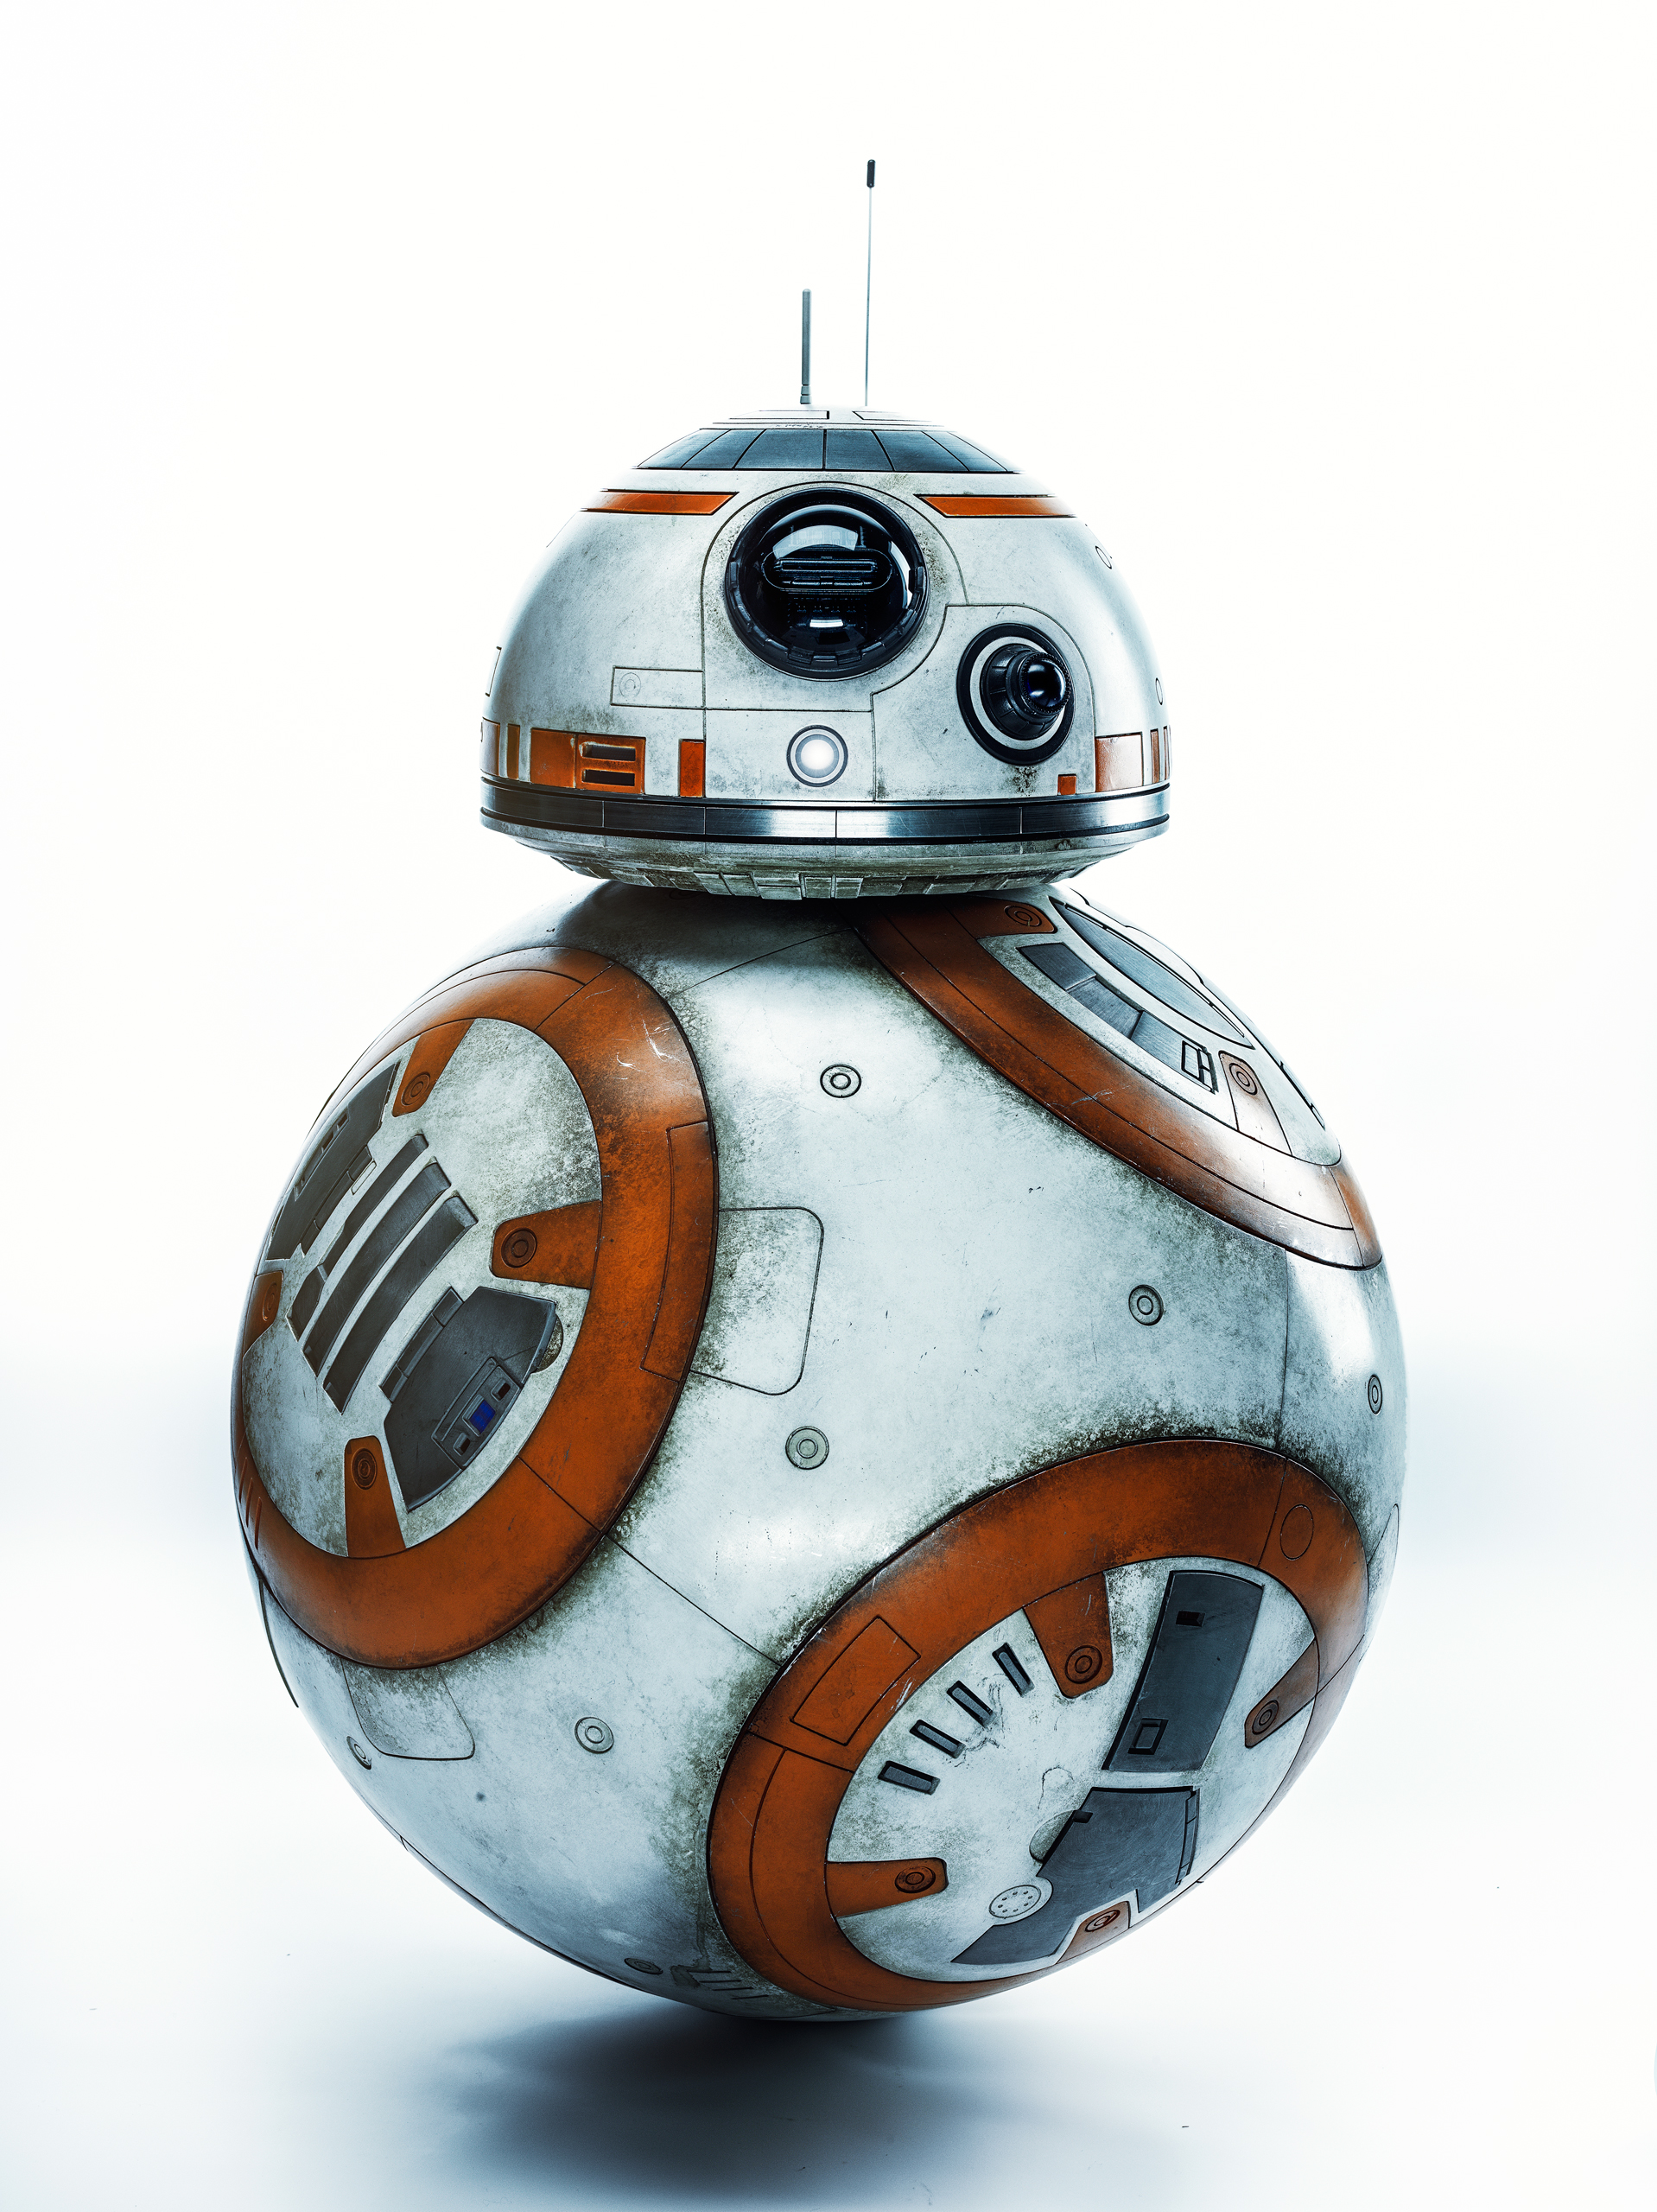 Abrams was determined to use as little CGI as possible, so he made BB-8—a fully functioning robot—who has already become an iconic character.